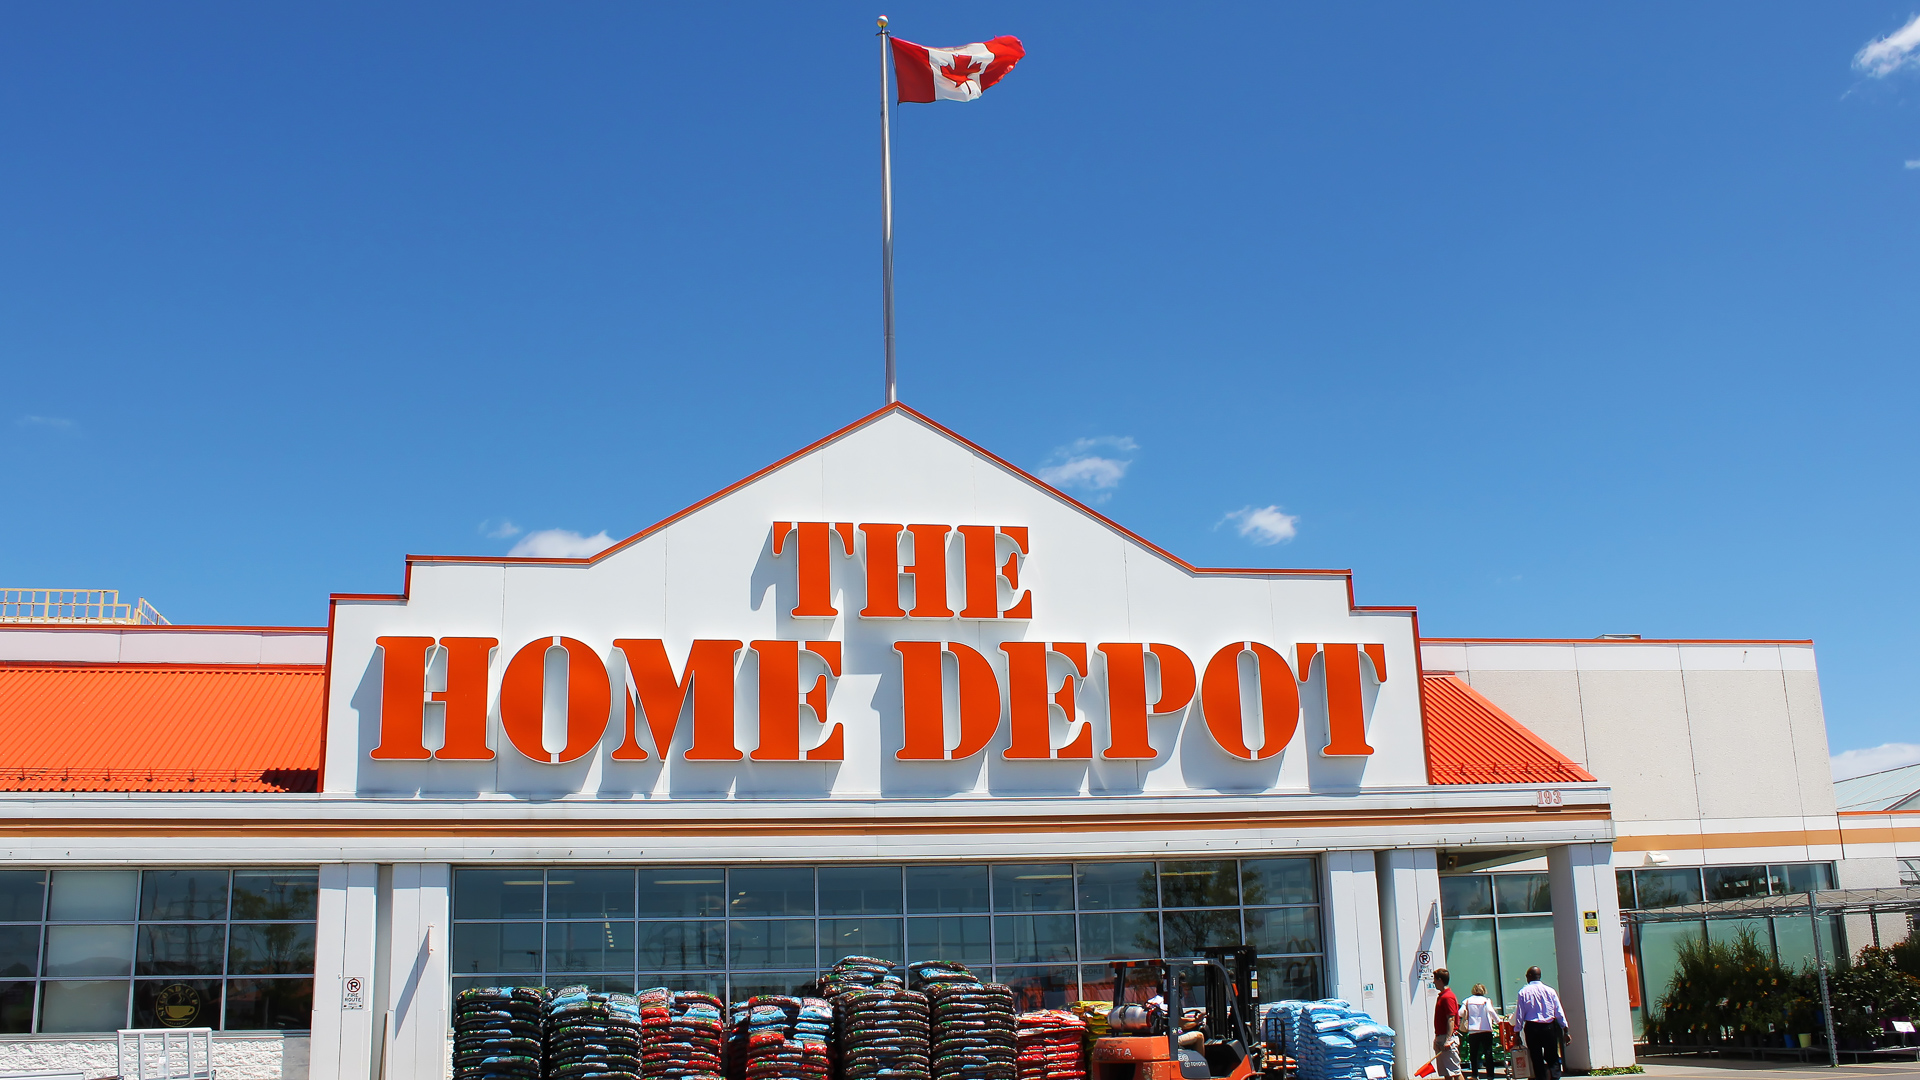 Home Depot Credit Card Application: Step by Step Guide | GOBankingRates